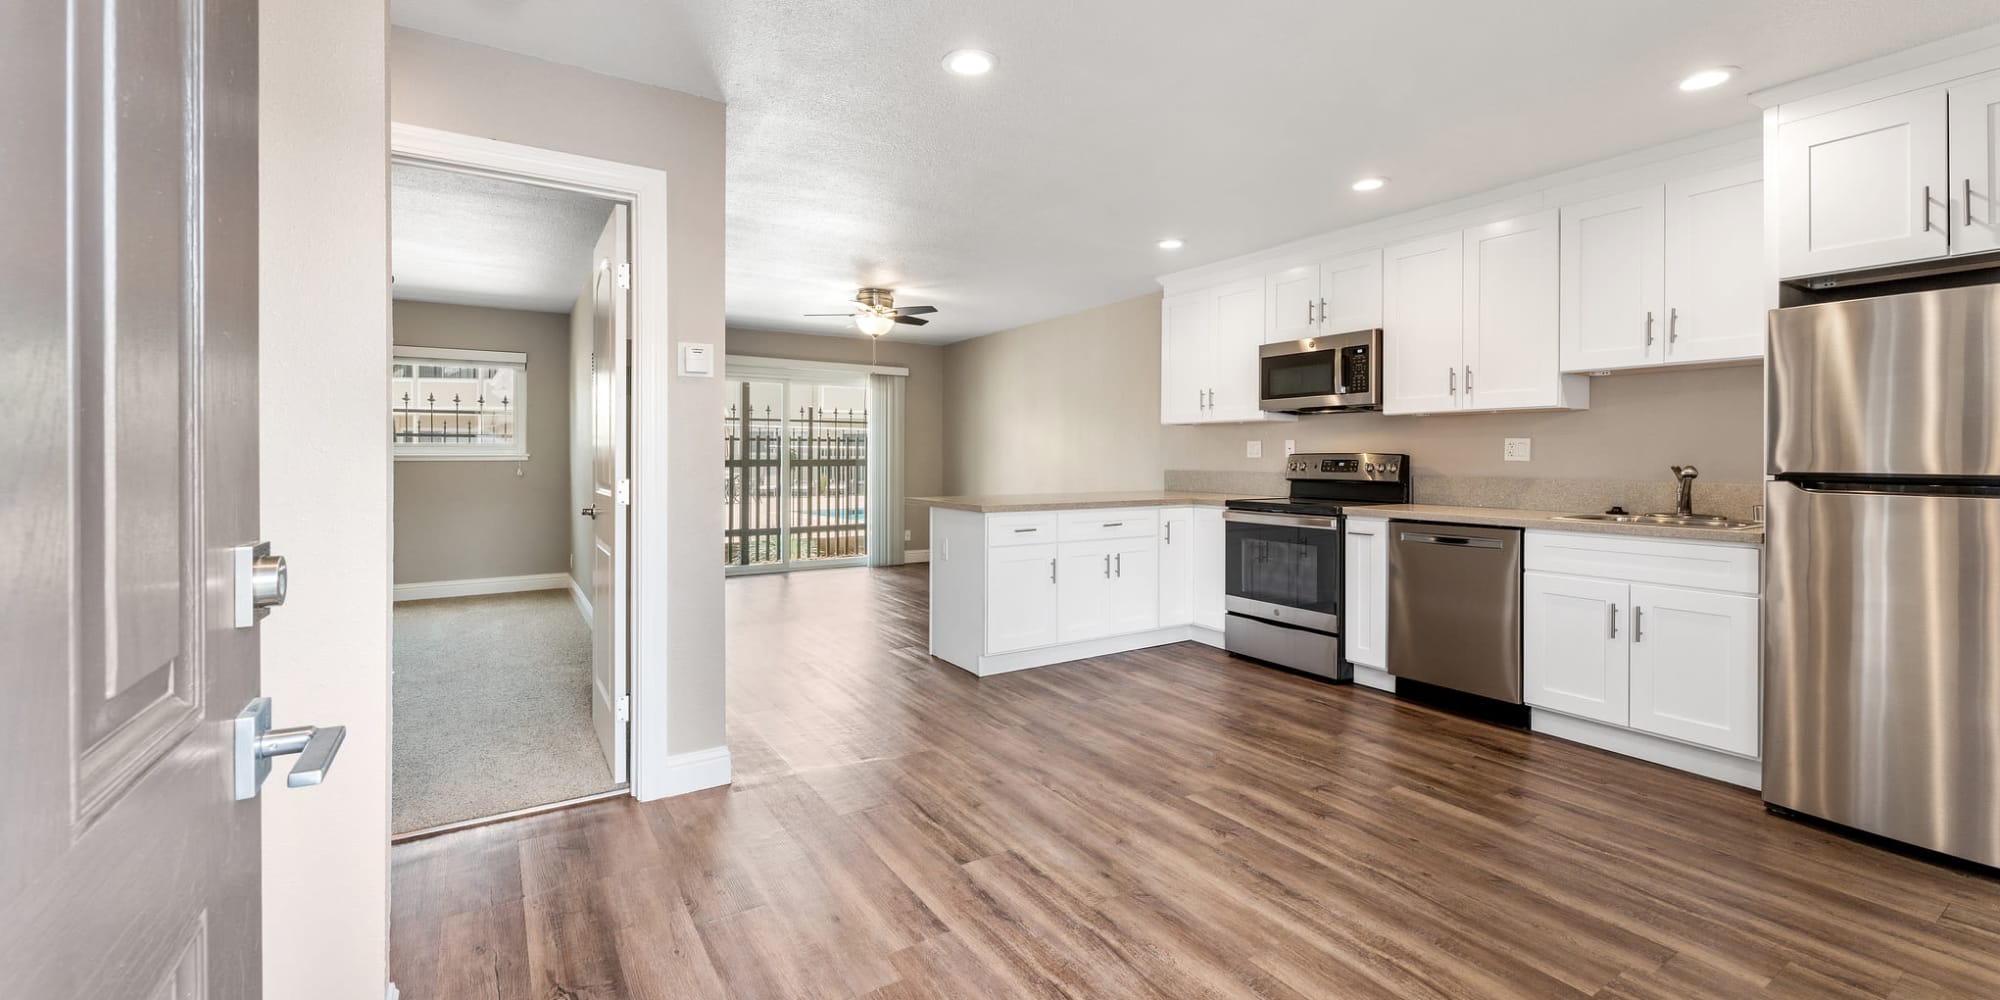 Hardwood flooring with stainless steel appliances at Fremont Arms Apartments in Fremont, California